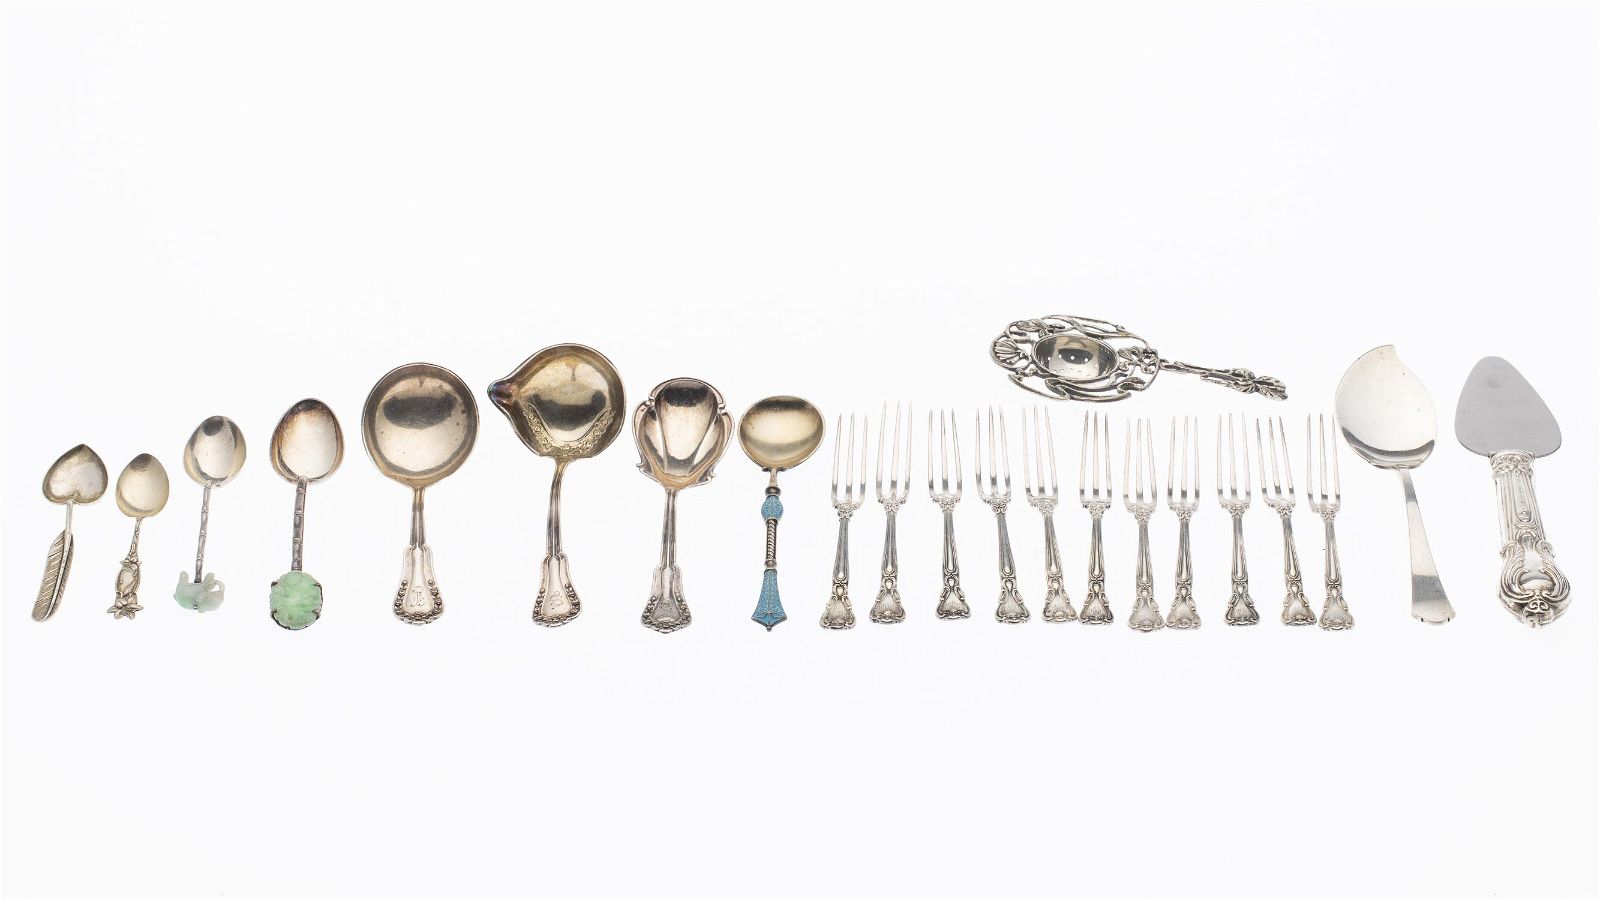 21 STERLING SILVER FLATWARE ARTICLES21 3d3306